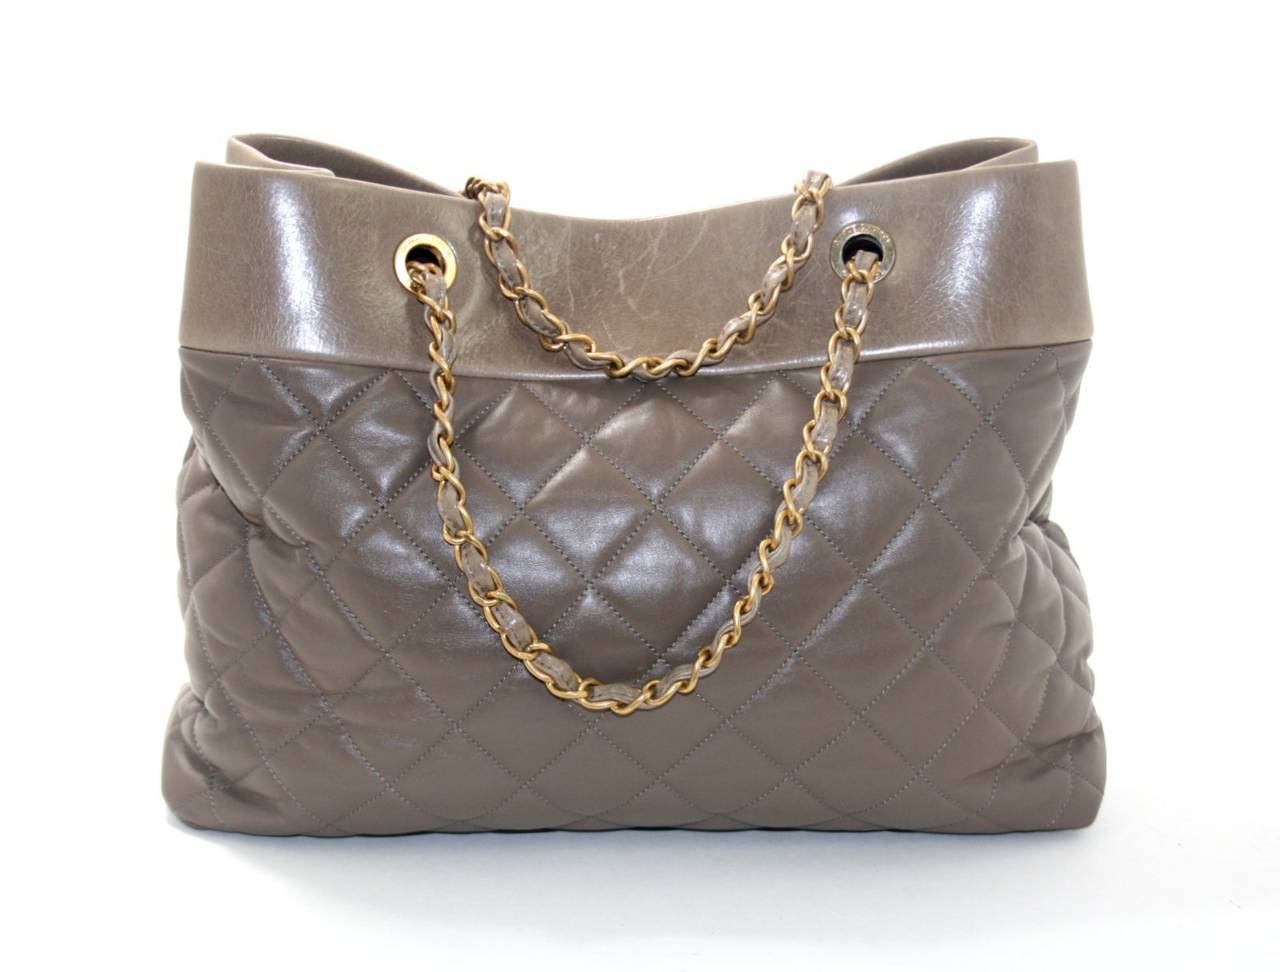 Chanel’s Taupe Leather Soft Elegance Tote is a fantastic find.  Carried one time, this beautiful tote retailed for over $4,000.00 with taxes.   The lighter top portion is a contrasting distressed leather; a few light mars can be seen on this portion